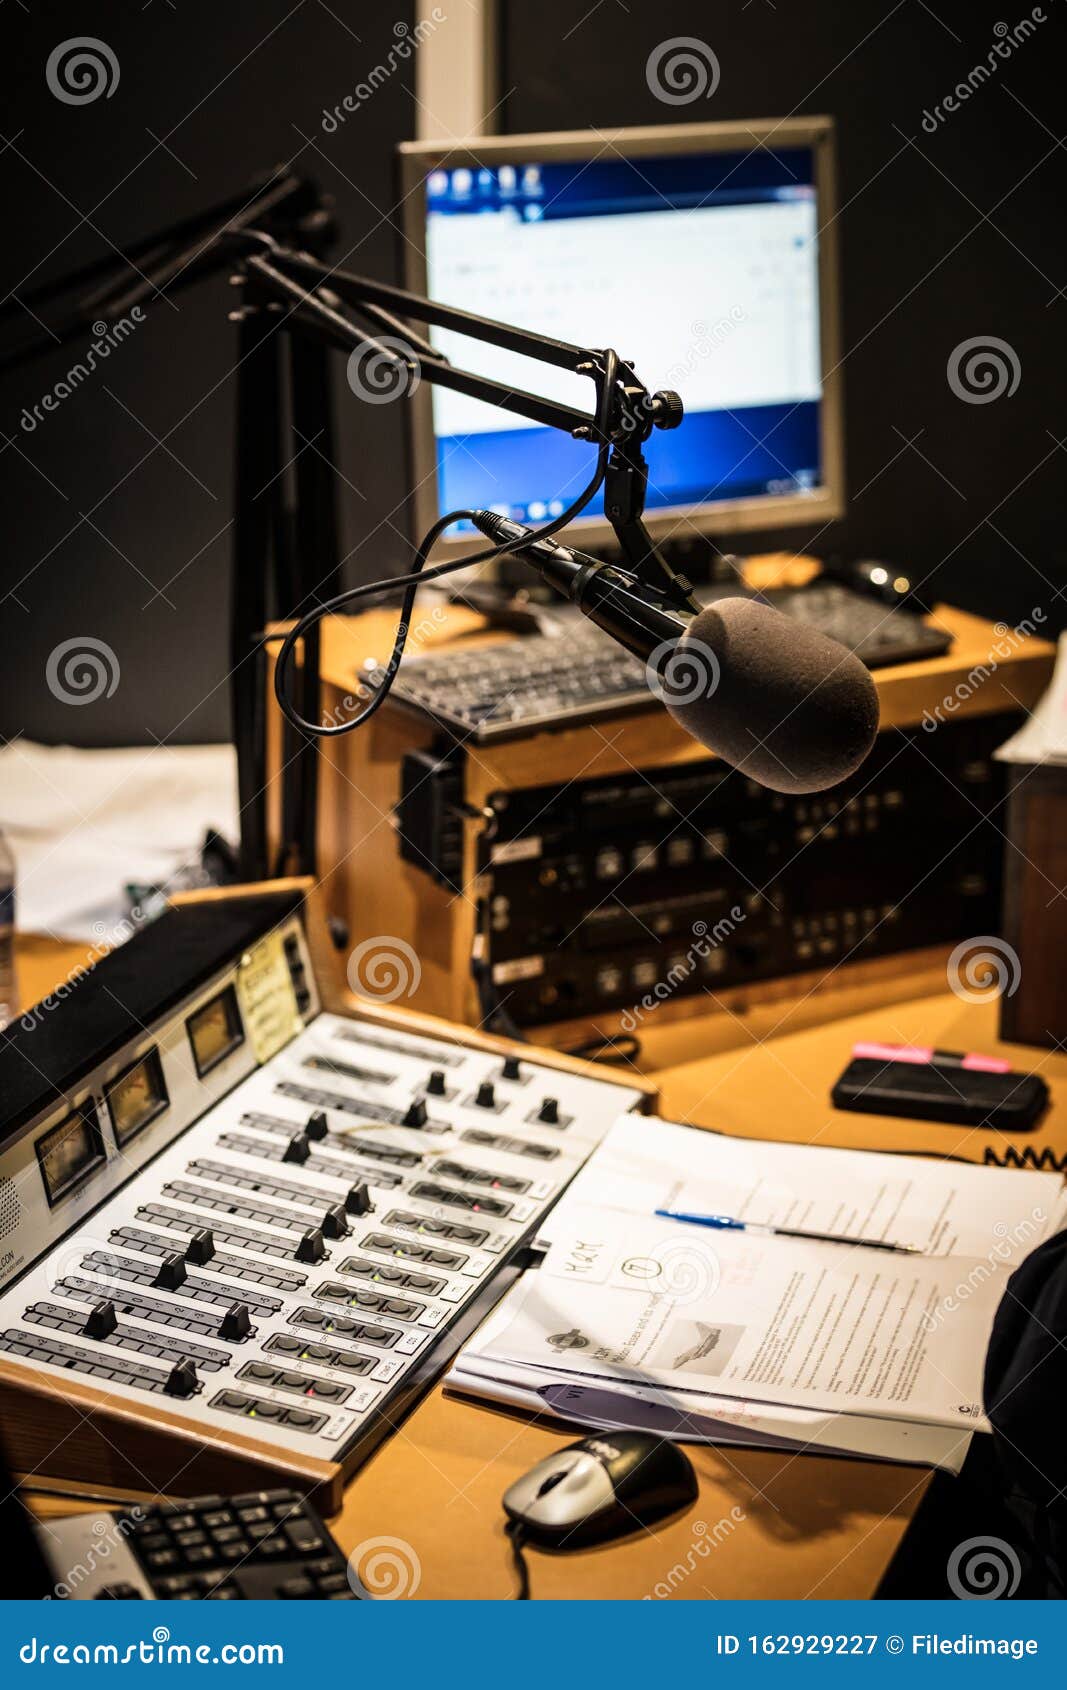 Radio Station Sound Desk And Mixer In A Studio Stock Image Image